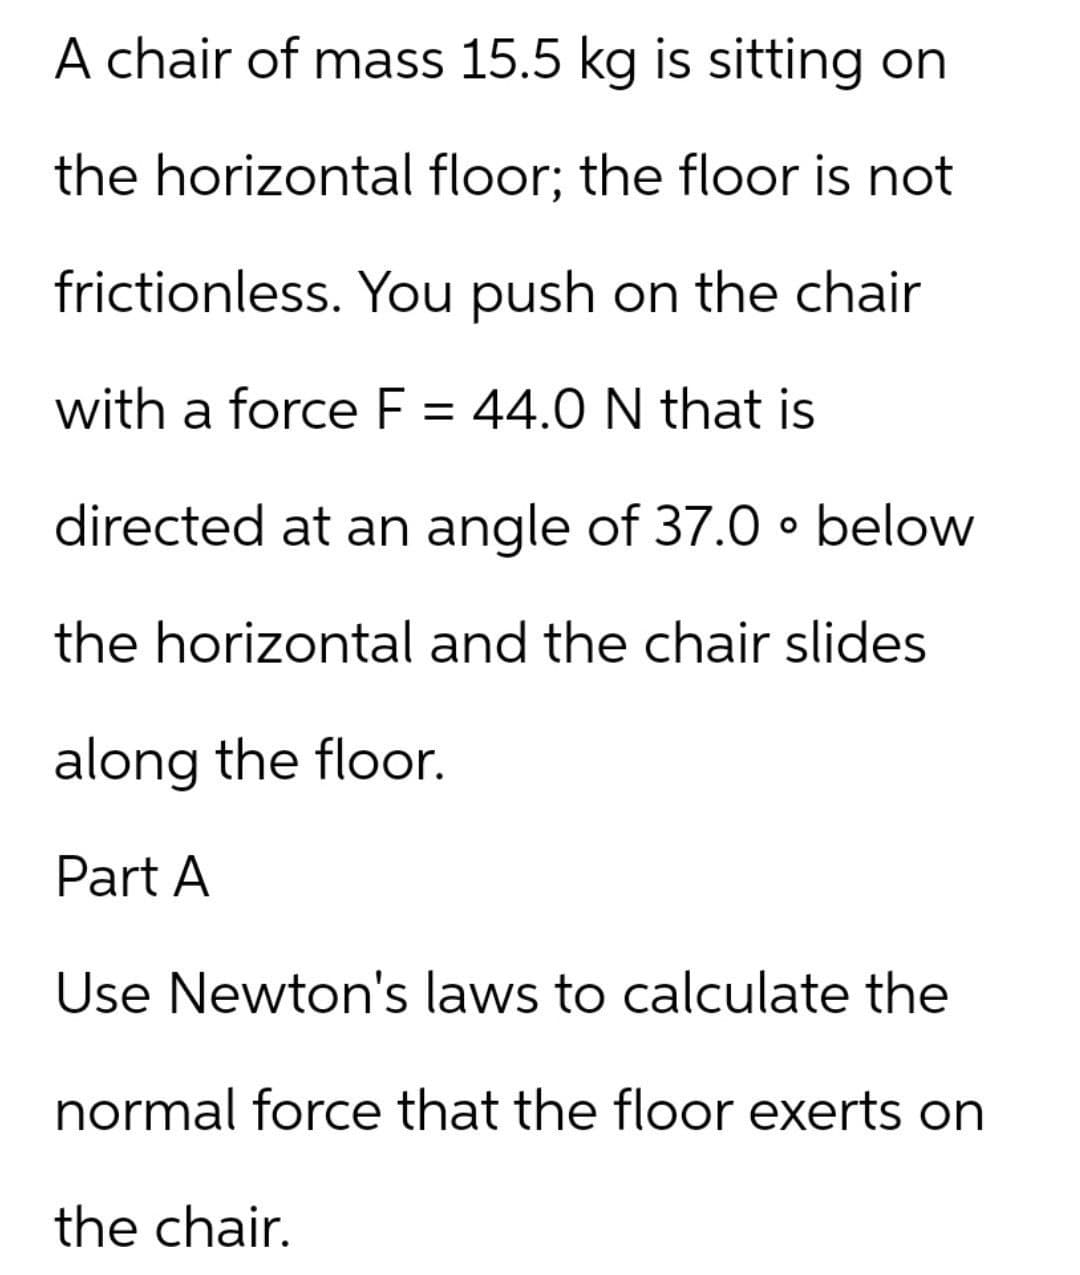 A chair of mass 15.5 kg is sitting on
the horizontal floor; the floor is not
frictionless. You push on the chair
with a force F = 44.0 N that is
directed at an angle of 37.0 • below
the horizontal and the chair slides
along the floor.
Part A
Use Newton's laws to calculate the
normal force that the floor exerts on
the chair.